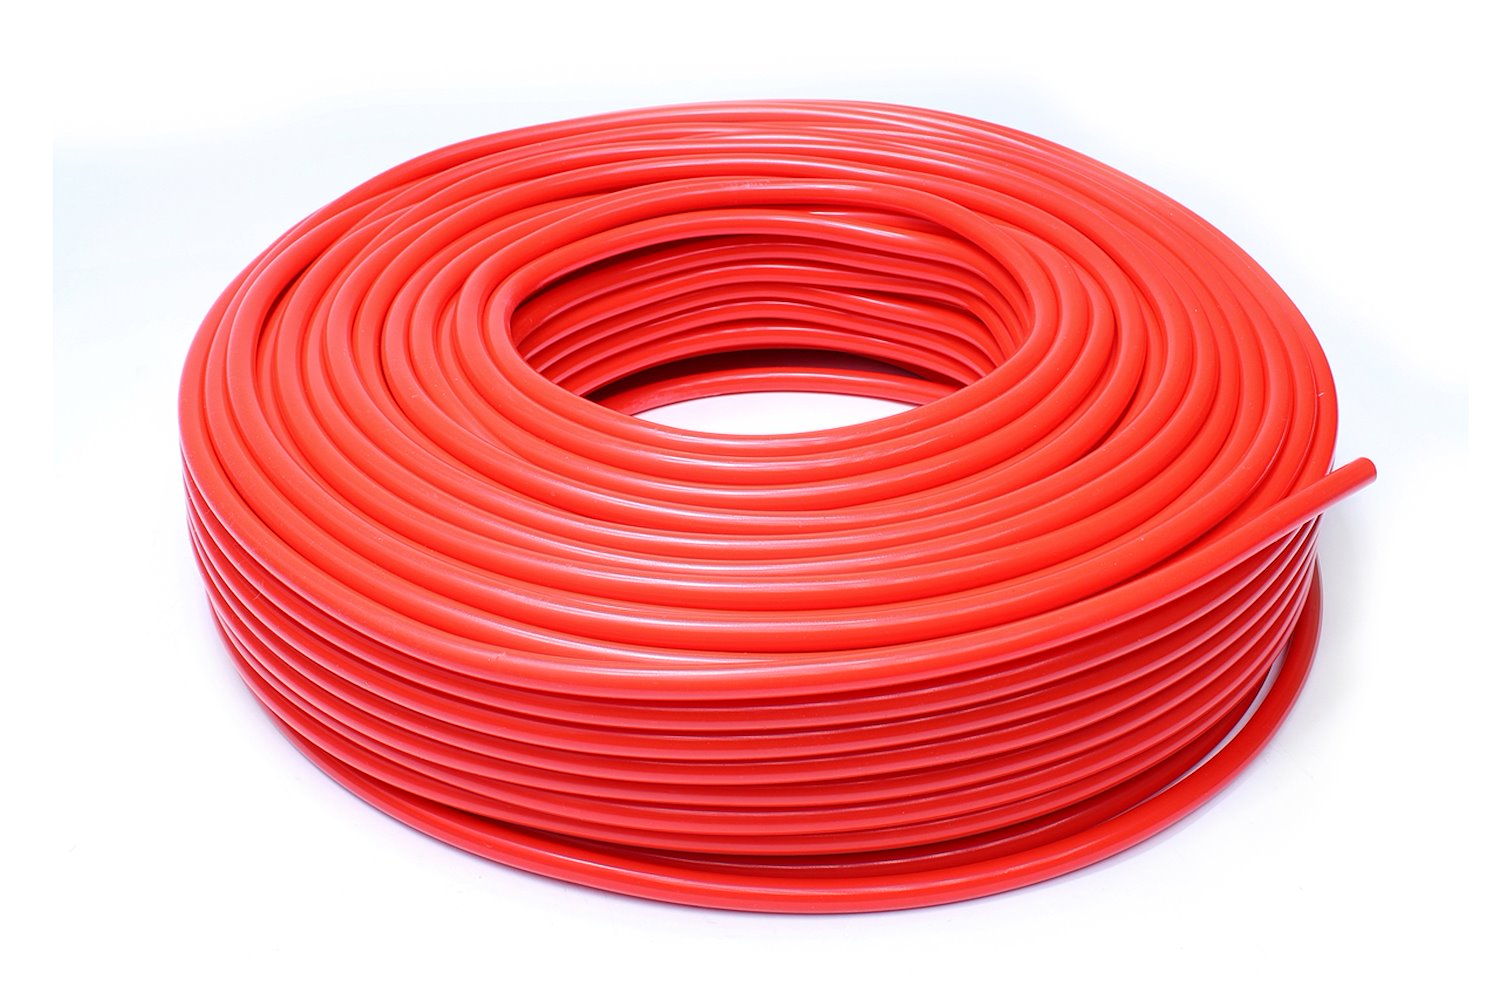 HTSVH35-REDx100 High-Temperature Silicone Vacuum Hose Tubing, 3.5 mm ID, 100 ft. Roll, Red